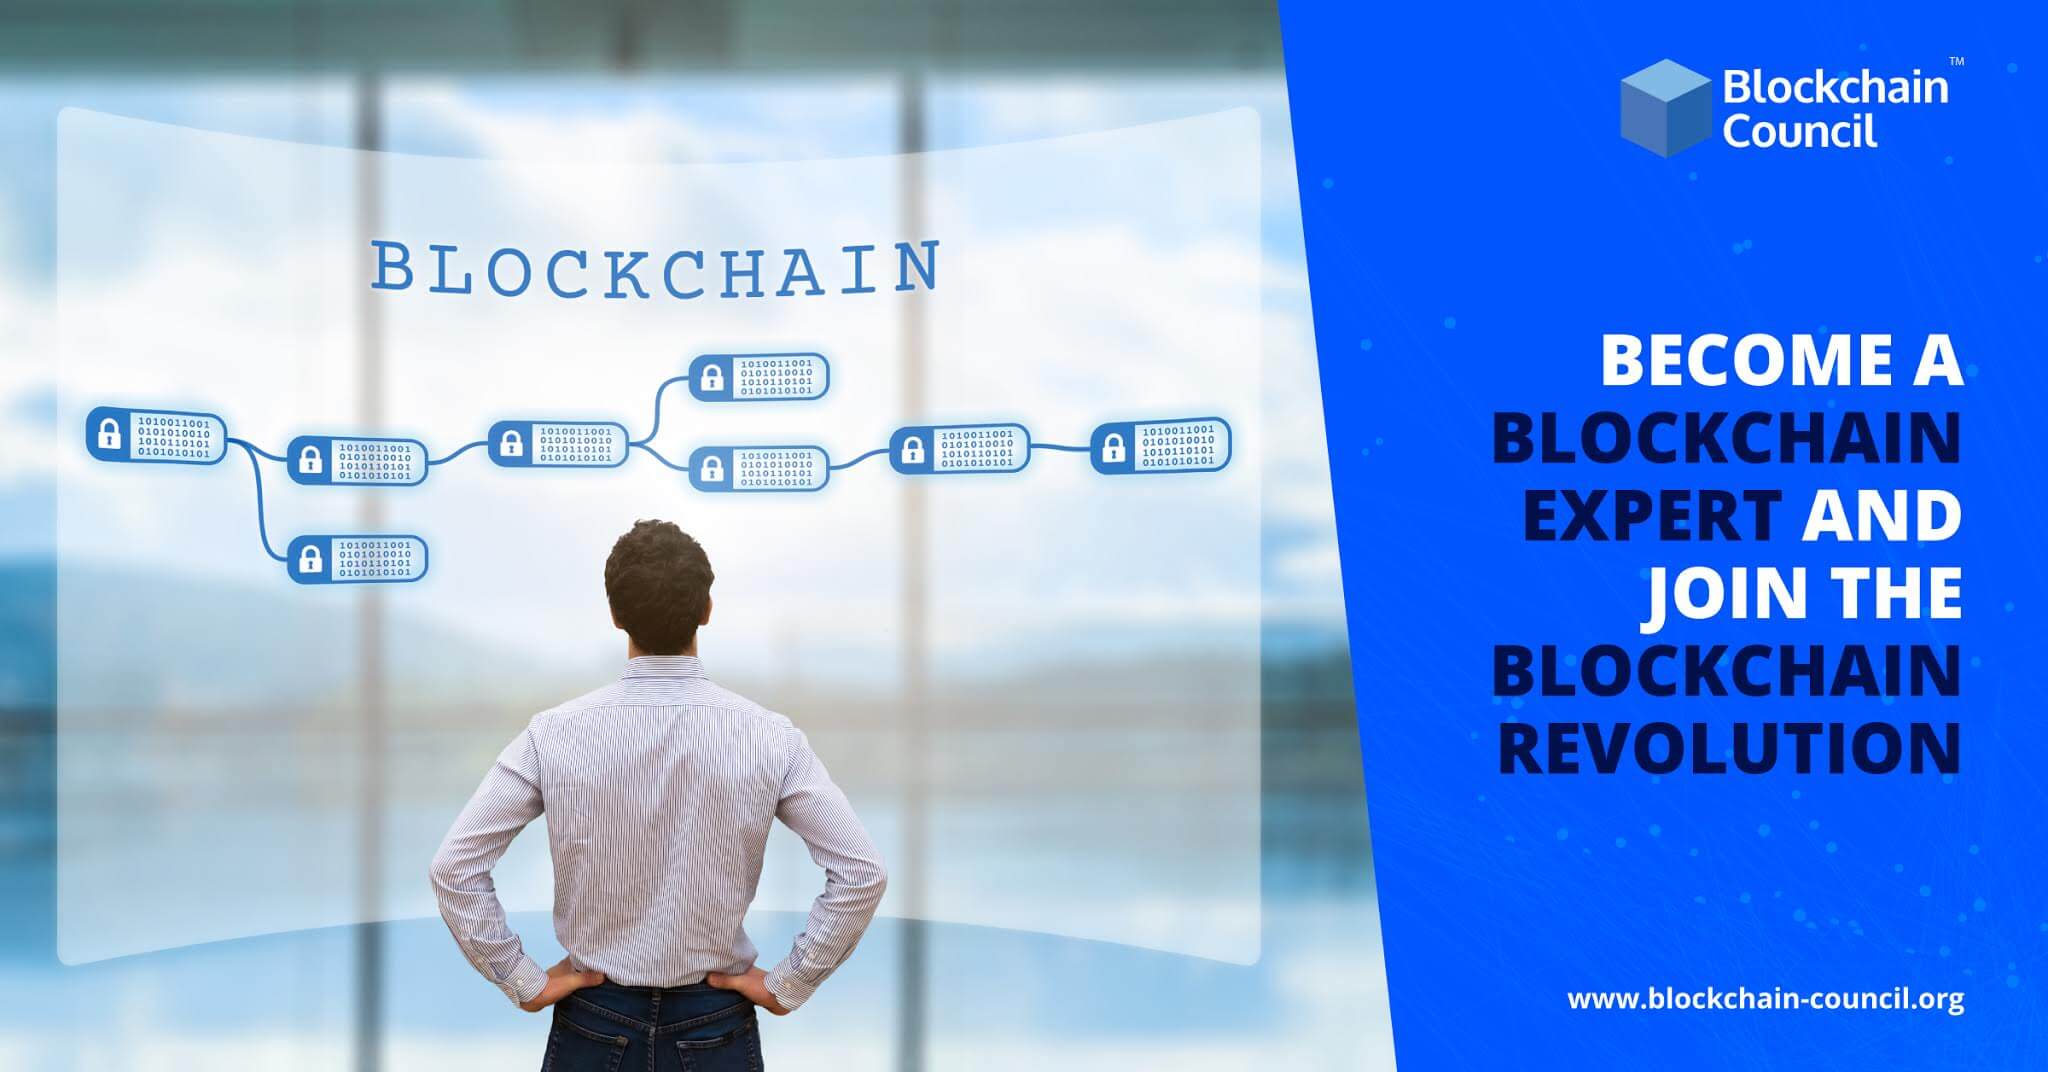 BECOME-A-BLOCKCHAIN-EXPERT-AND-JOIN-THE-BLOCKCHAIN-REVOLUTION